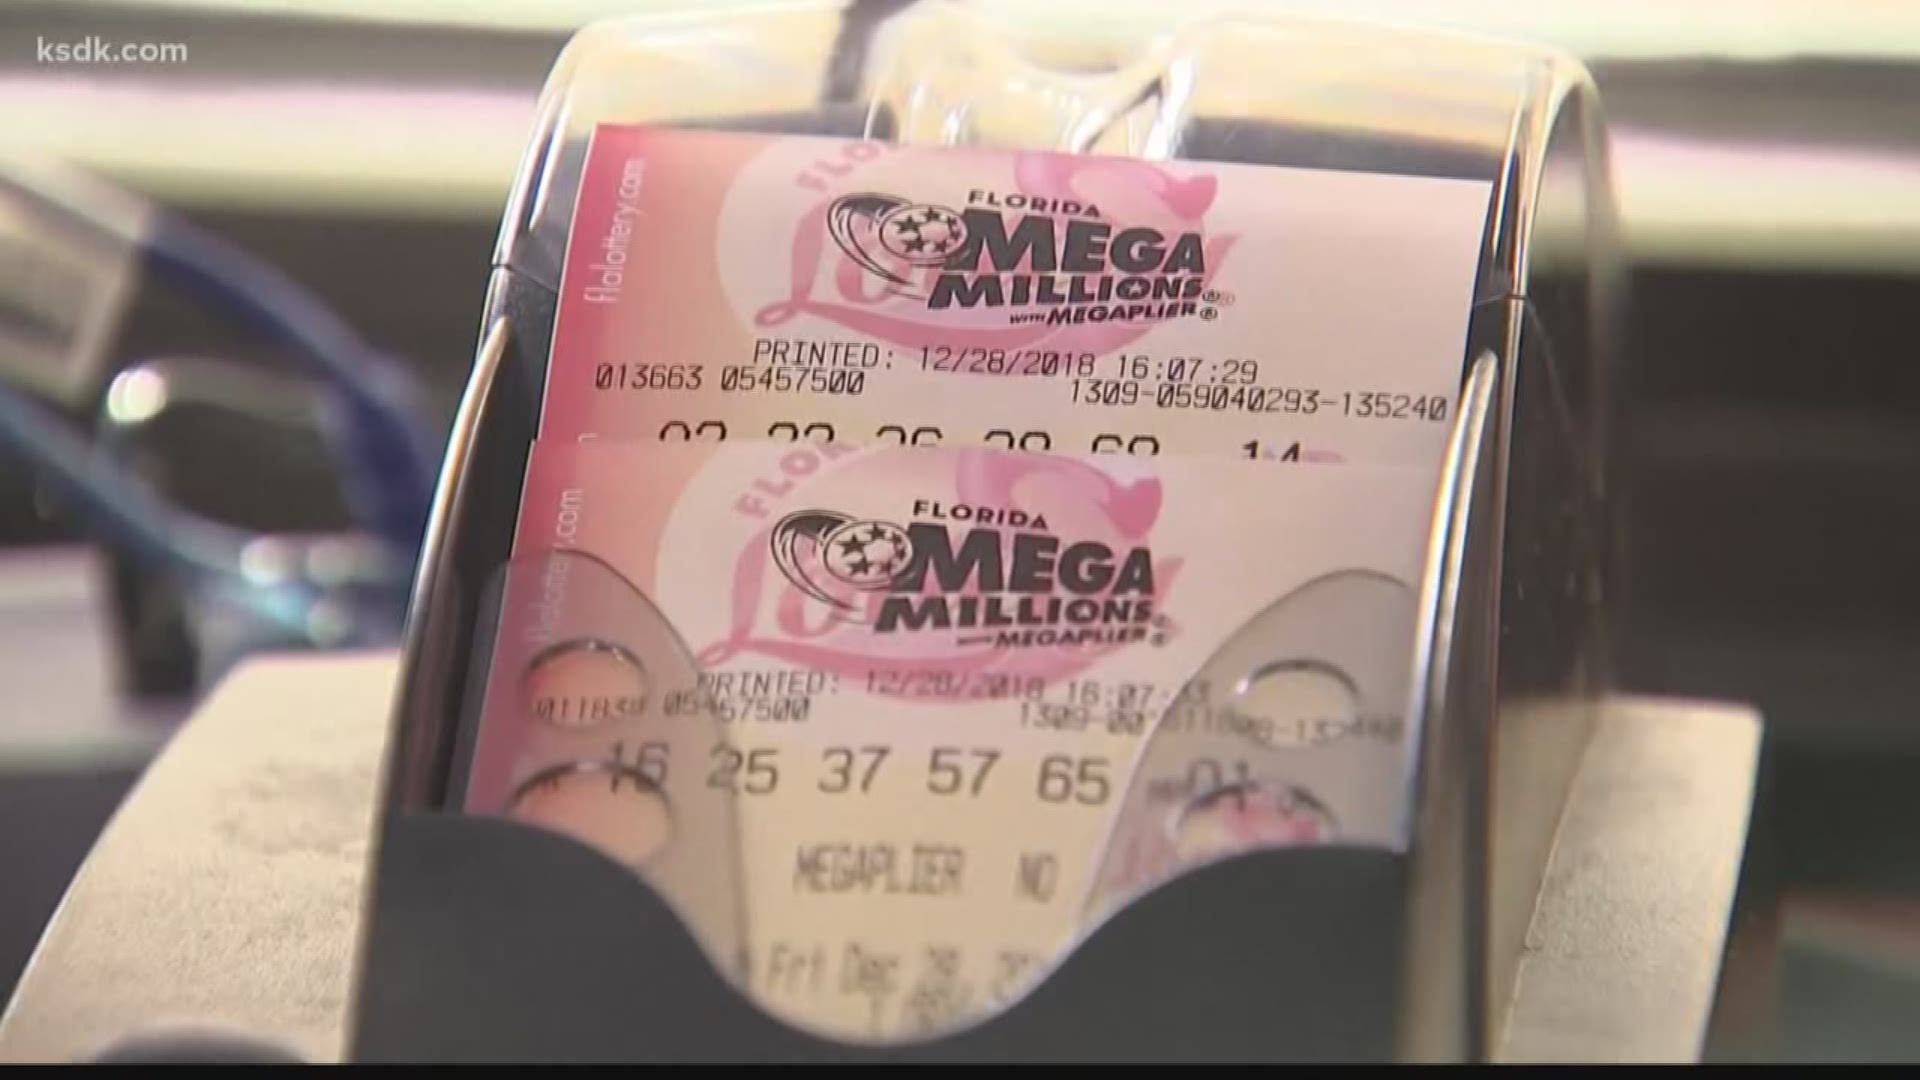 A St. Louis man is feeling pretty lucky after buying a winning Mega Millions ticket for the Christmas Day drawing.